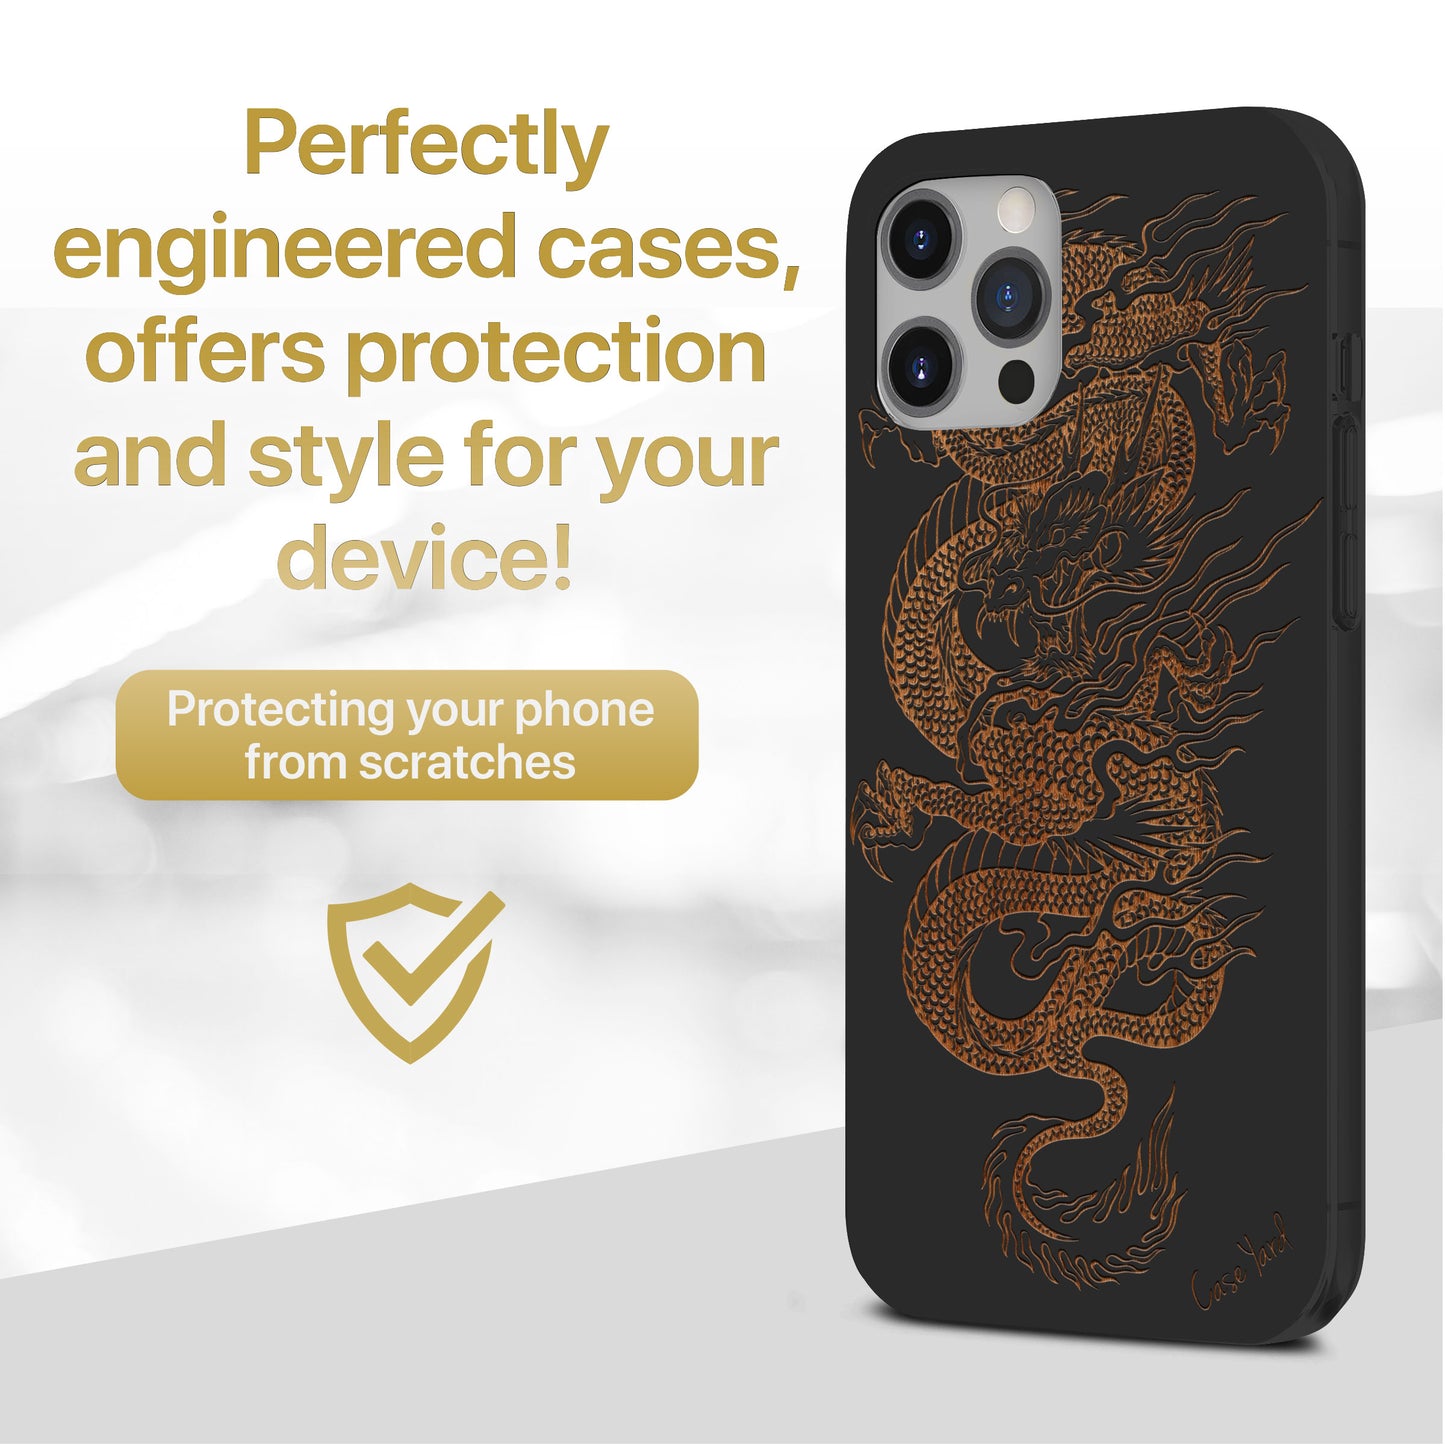 Wooden Cell Phone Case Cover, Laser Engraved case for iPhone & Samsung phone Dragon Design